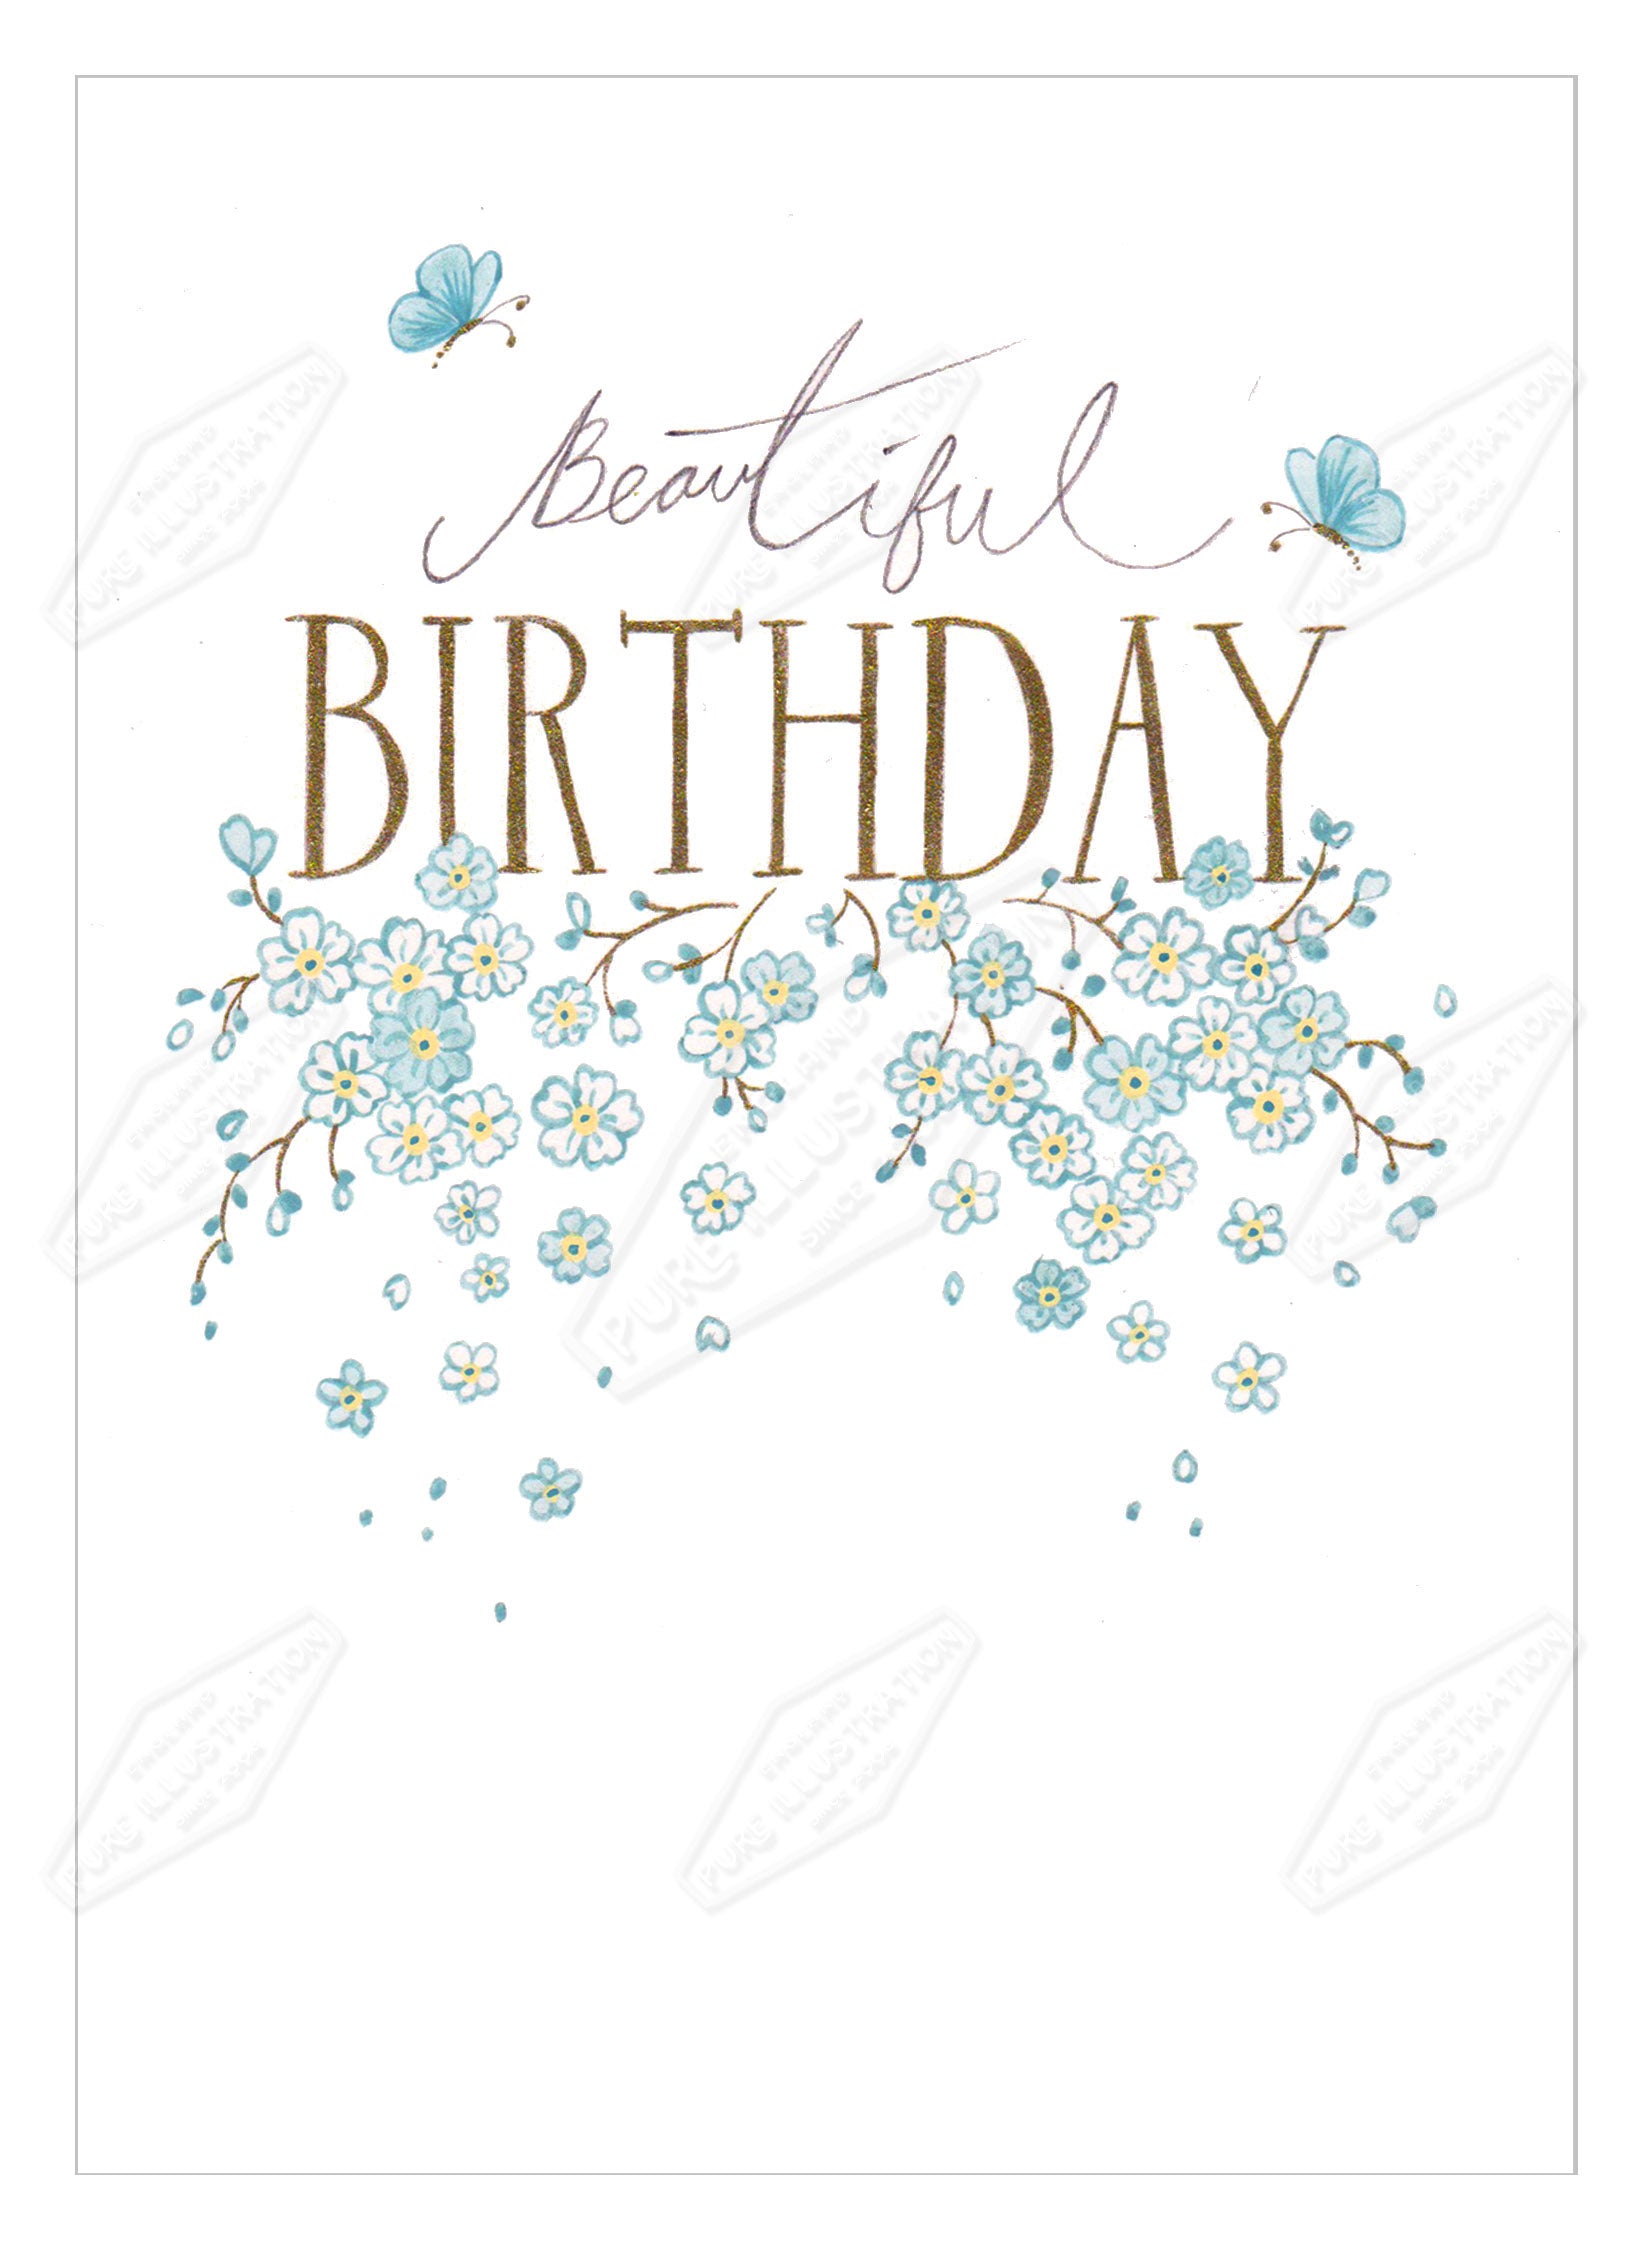 00035863AMA - Ally Marie is represented by Pure Art Licensing Agency - Birthday Greeting Card Design